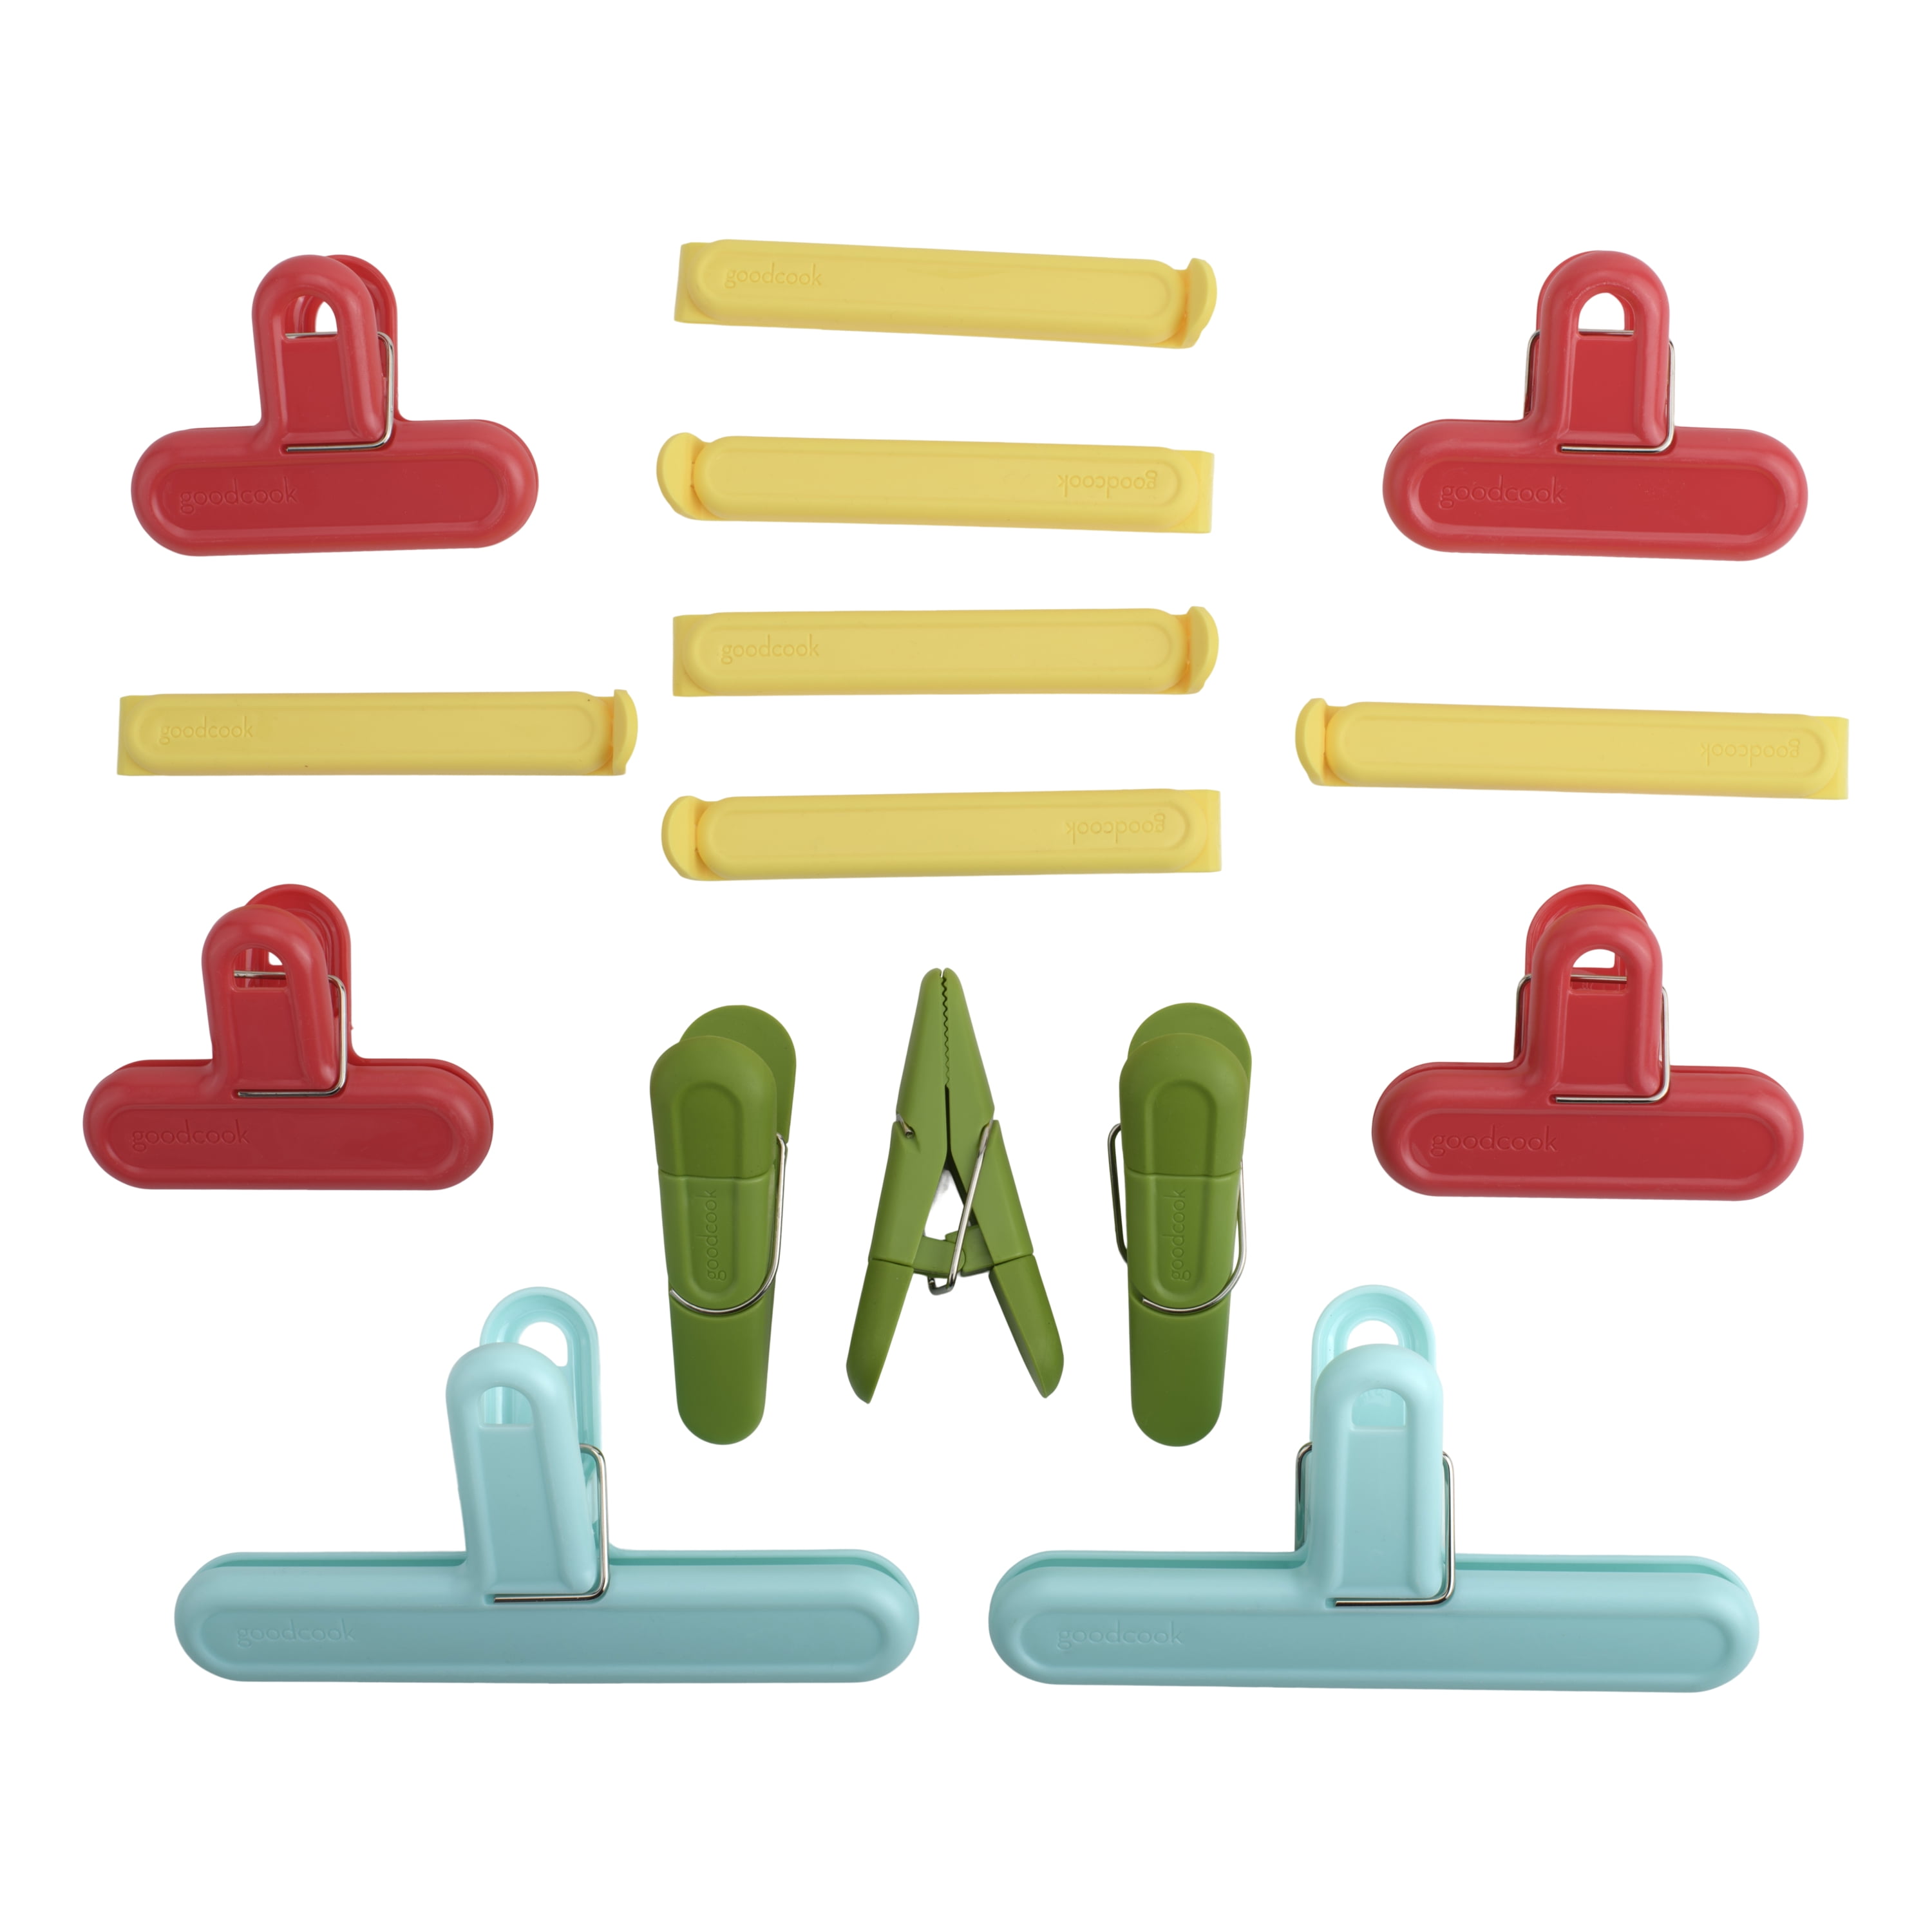 Good Cook 6865224 Assorted Color Bag Clips - 15 Piece